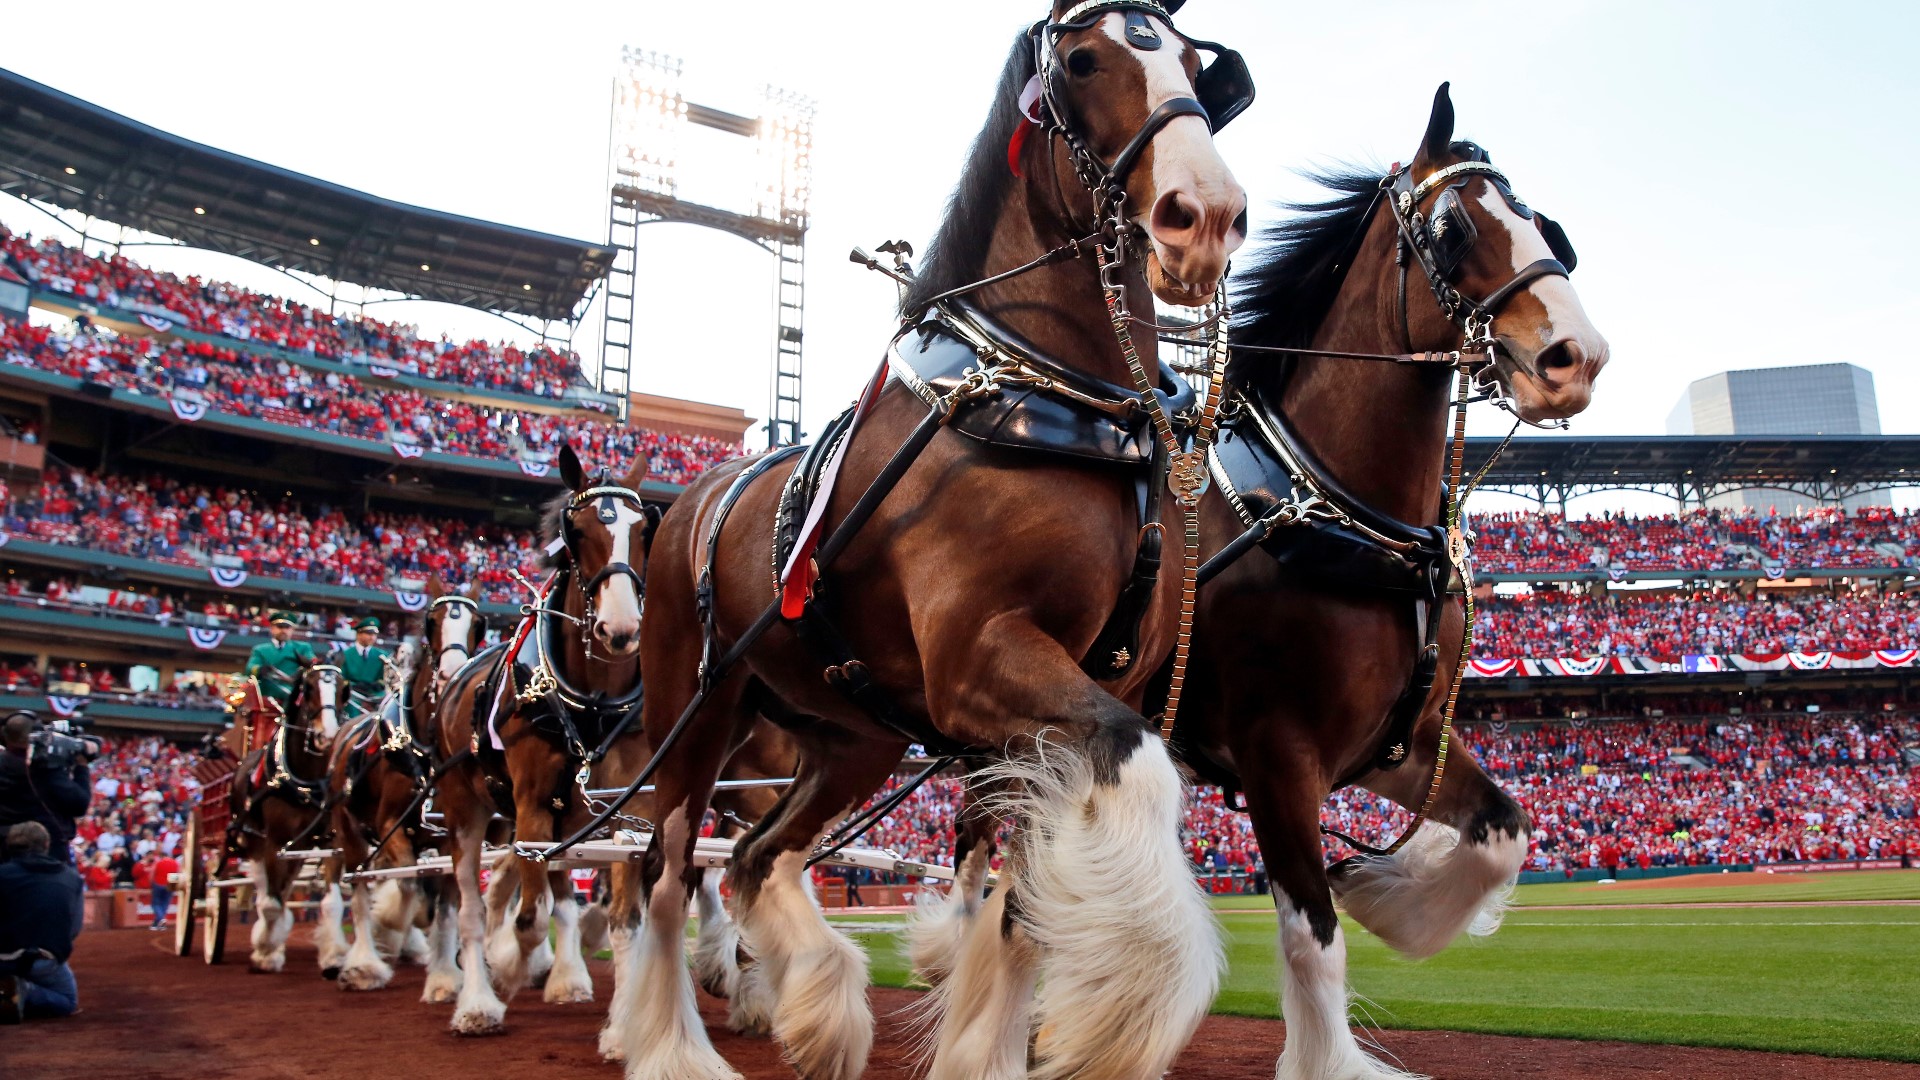 Budweiser Clydesdales commercial honors 9/11 victims